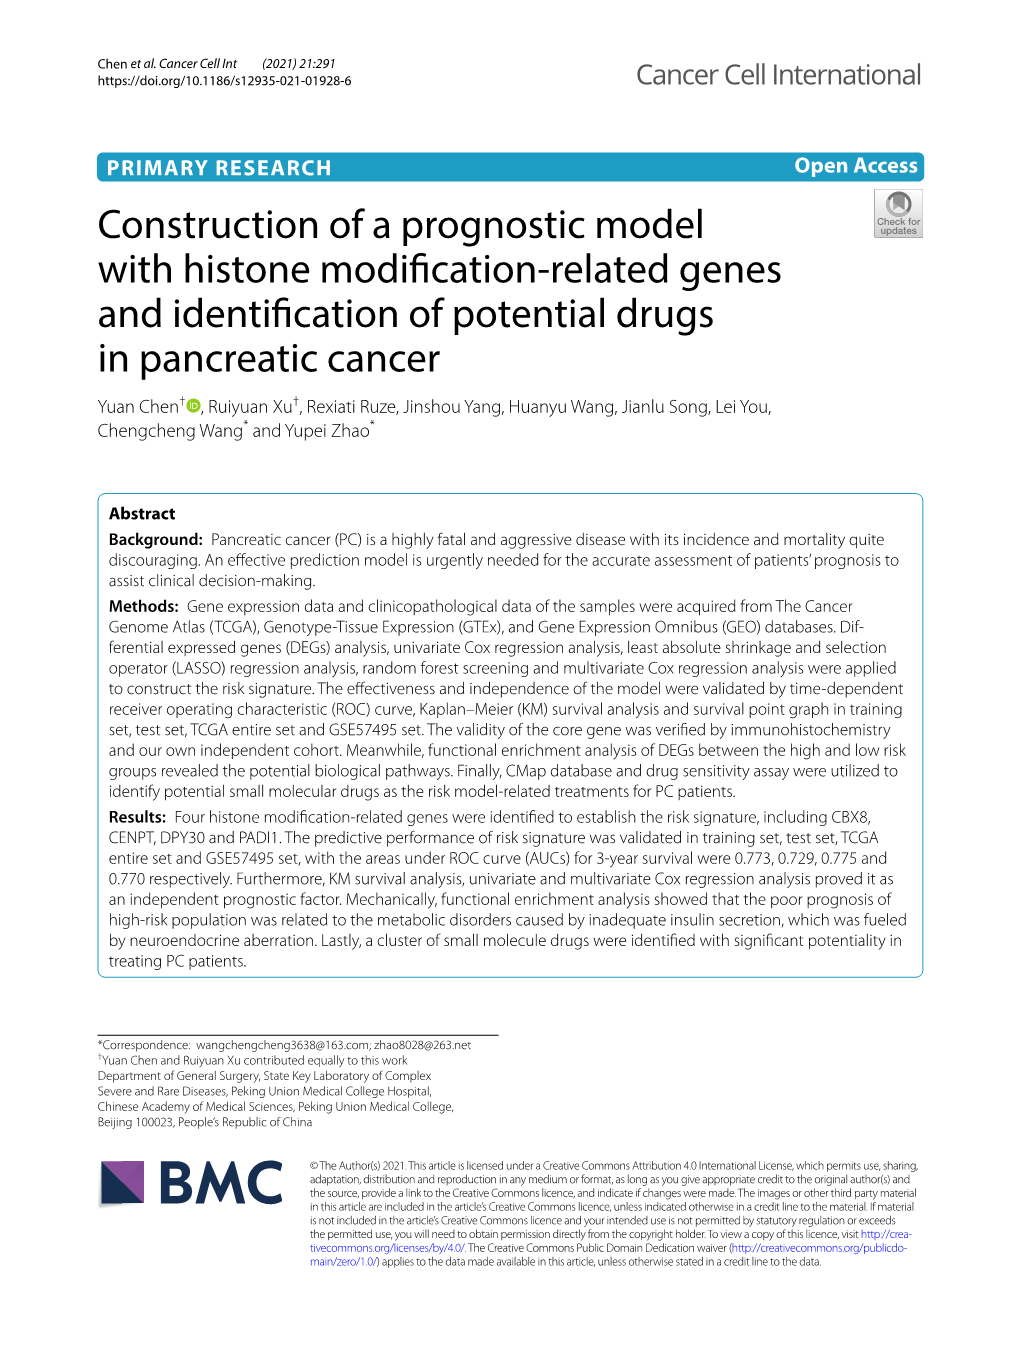 Construction of a Prognostic Model with Histone Modification-Related